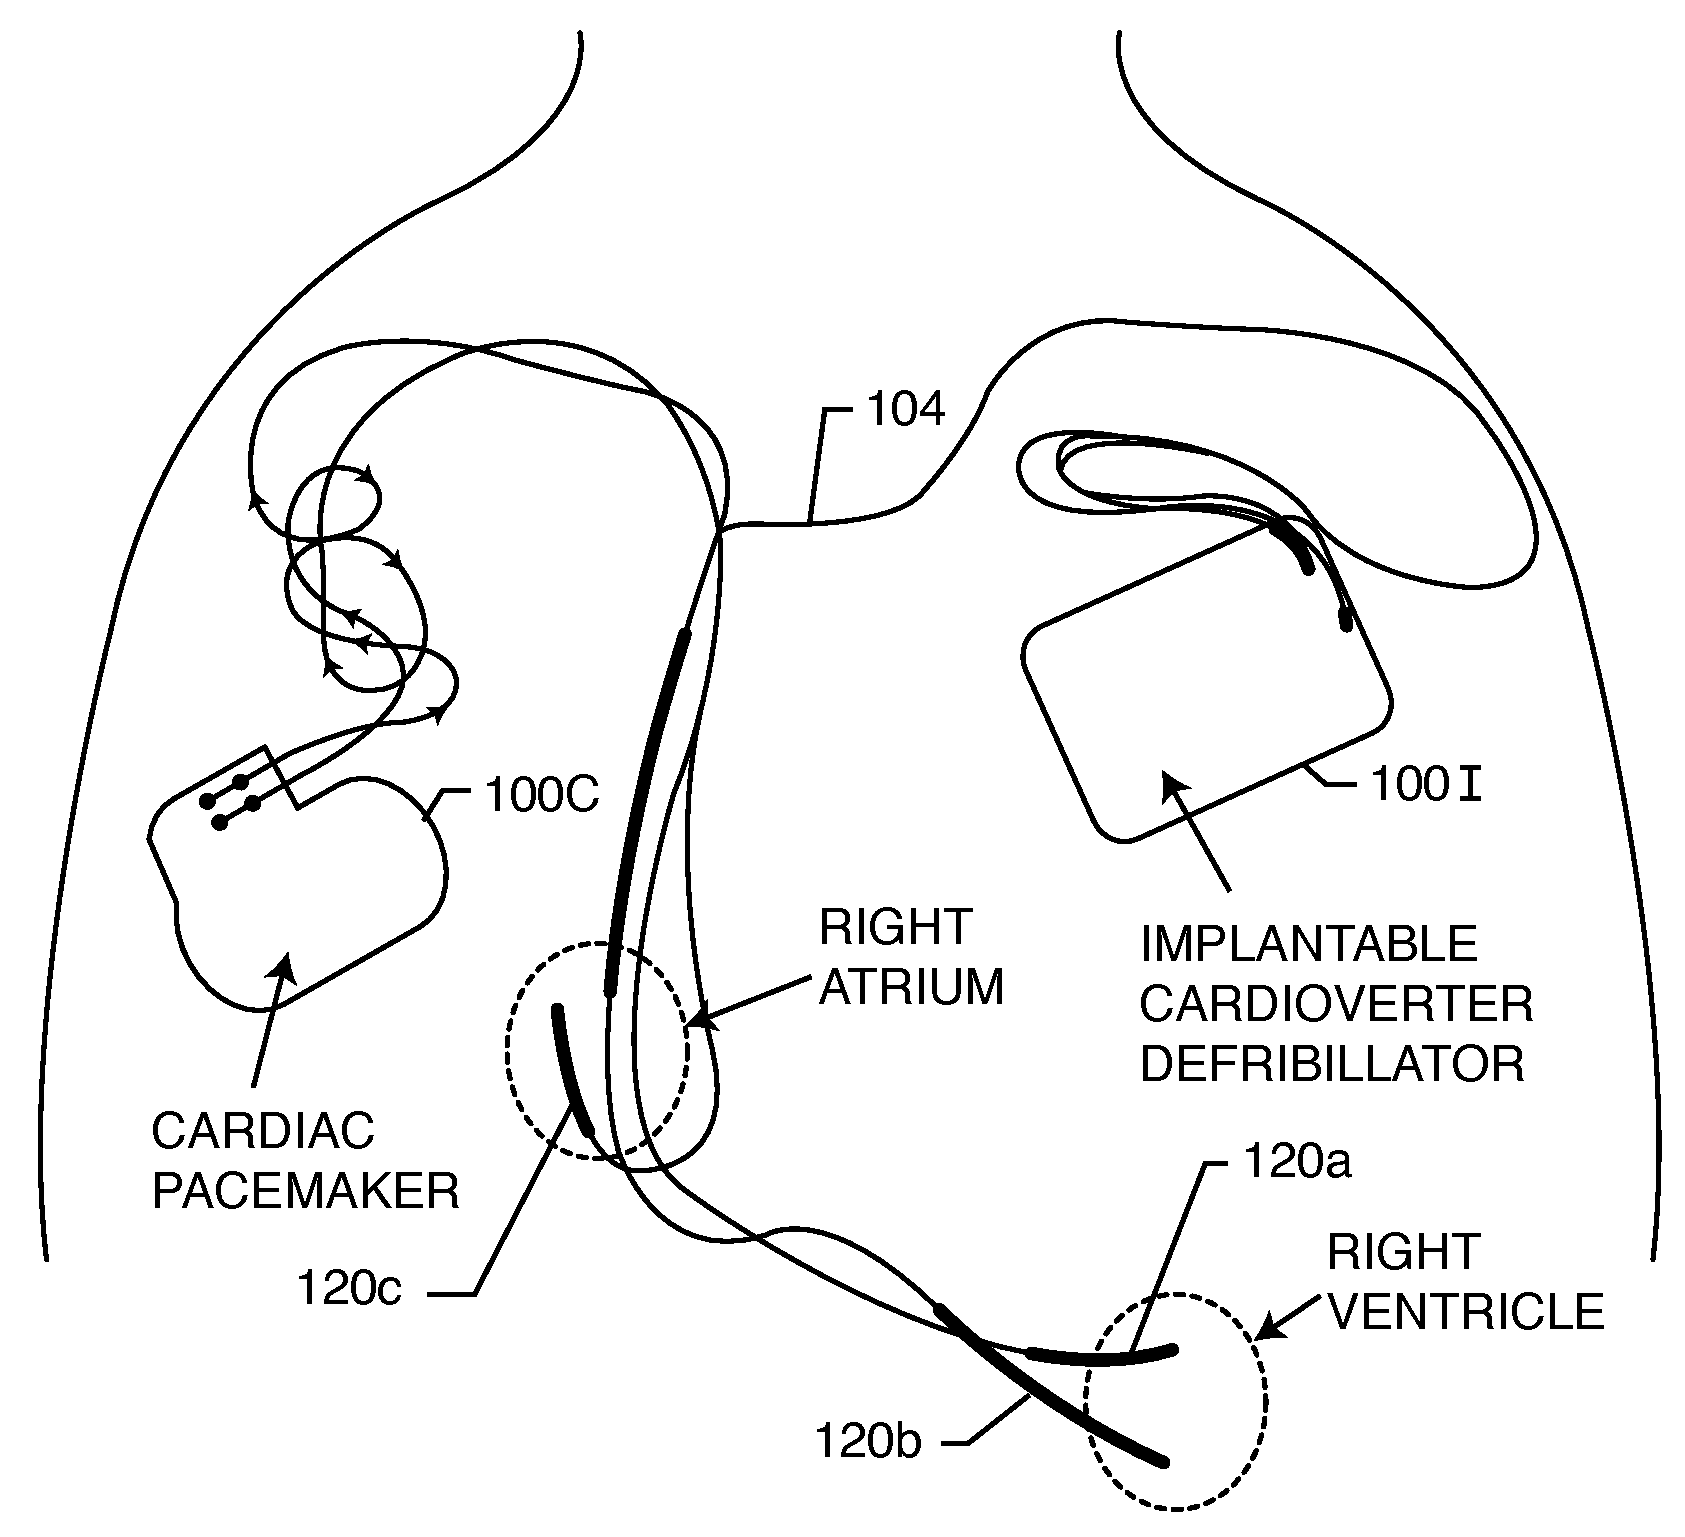 Switch for turning off therapy delivery of an active implantable medical device during MRI scans